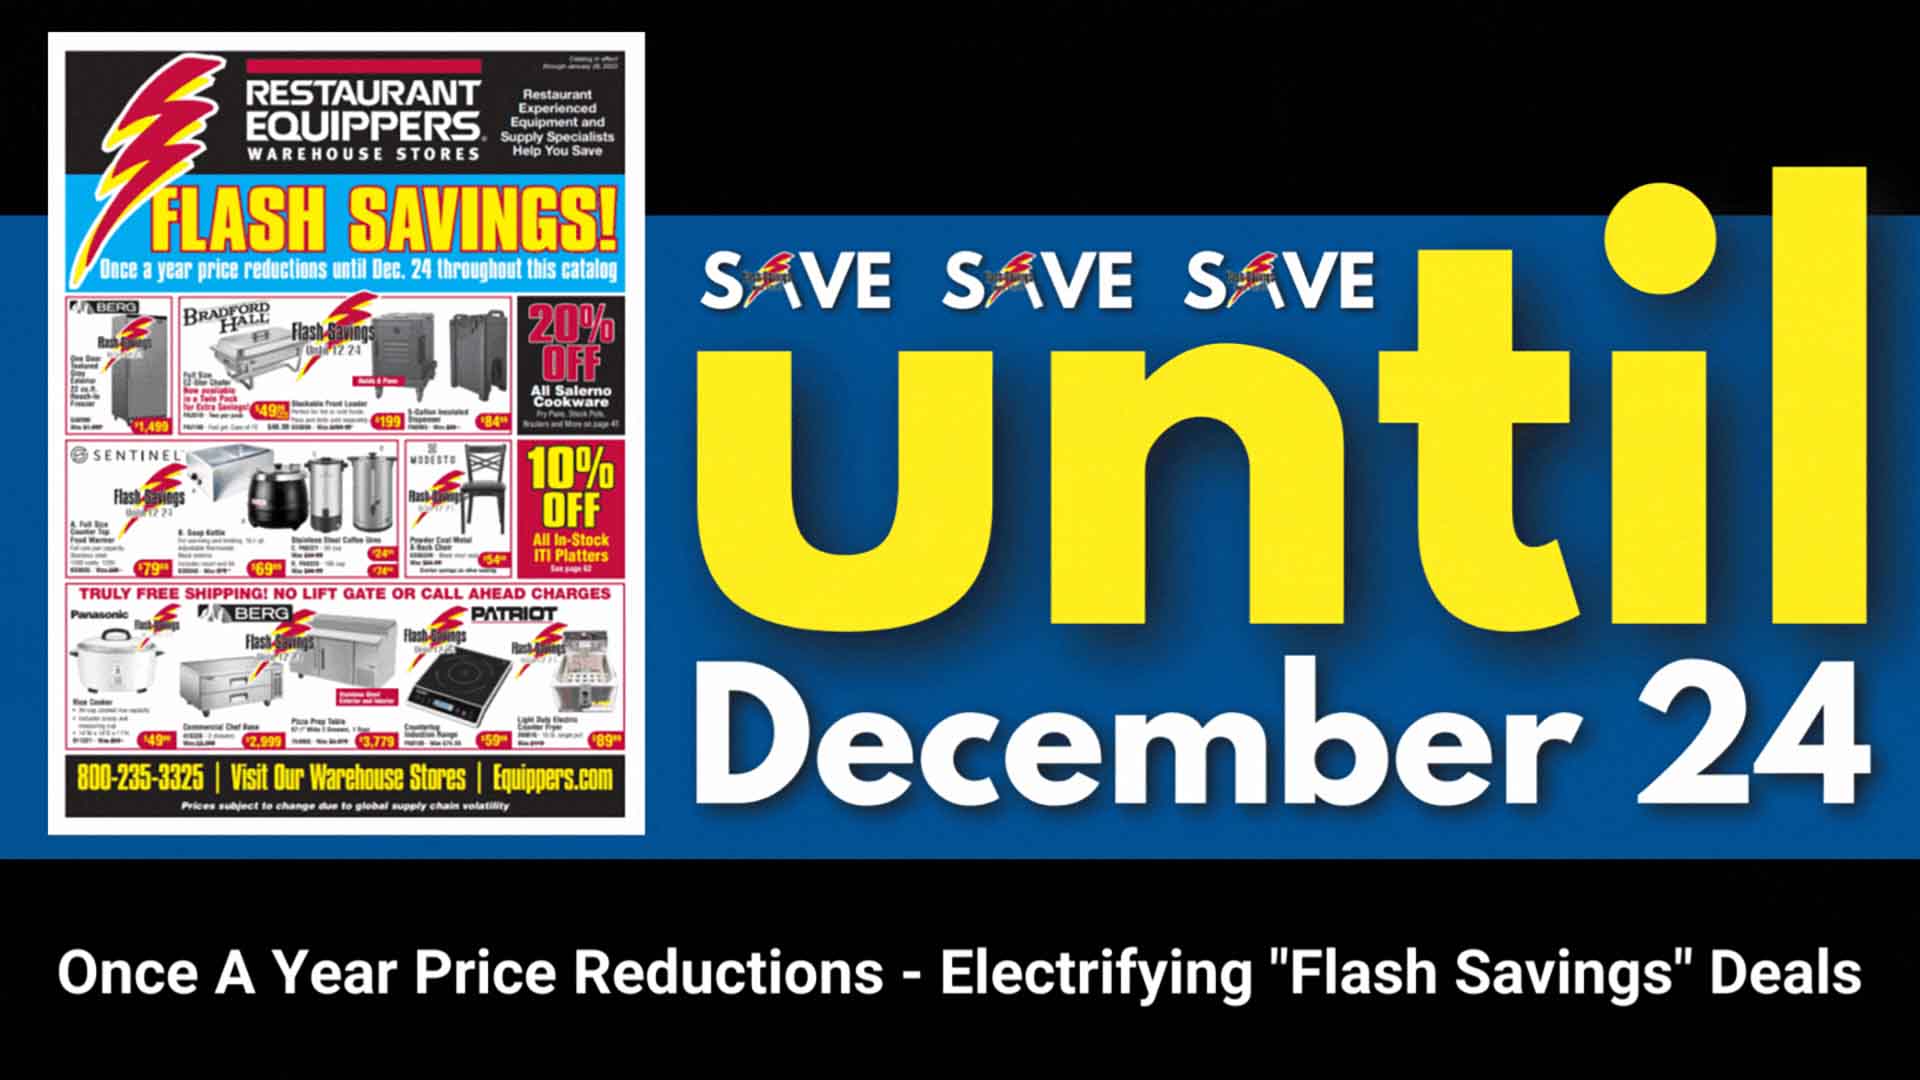 SAVE SAVE SAVE Until December 24. Once  a year price reductions - Electrifying "Flash Savings" Deals.